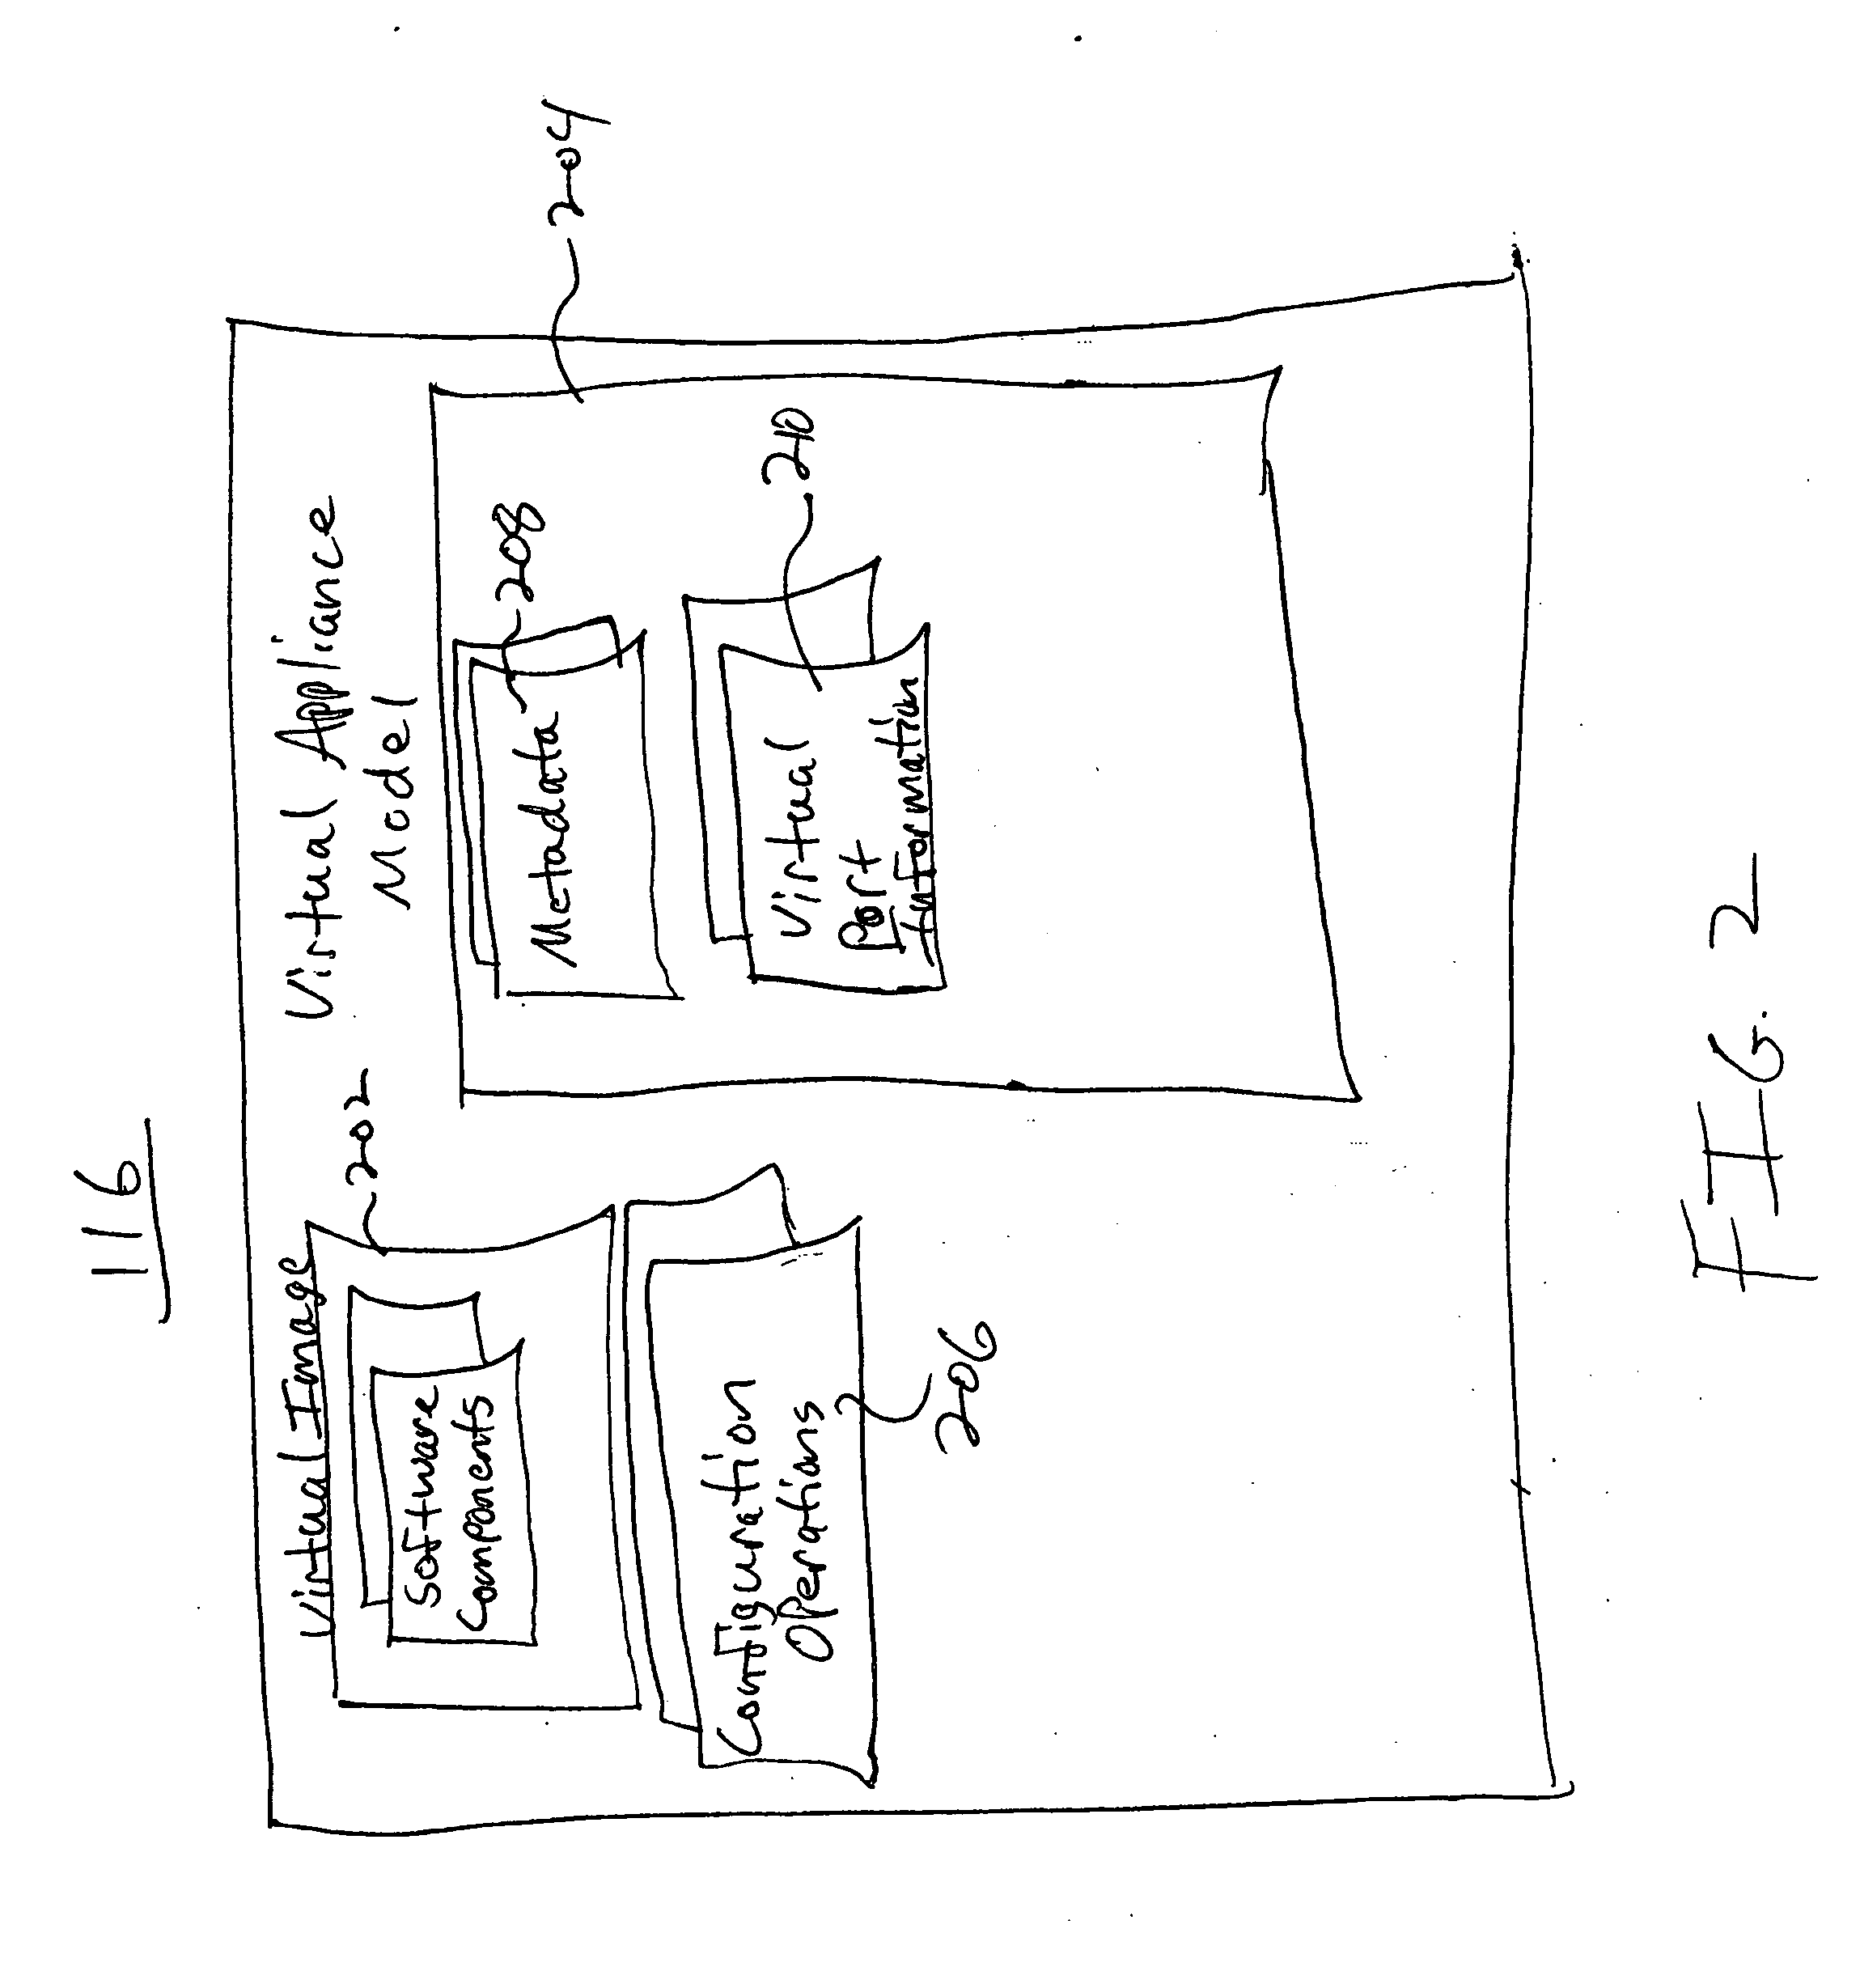 Virtual solution composition and deployment system and method